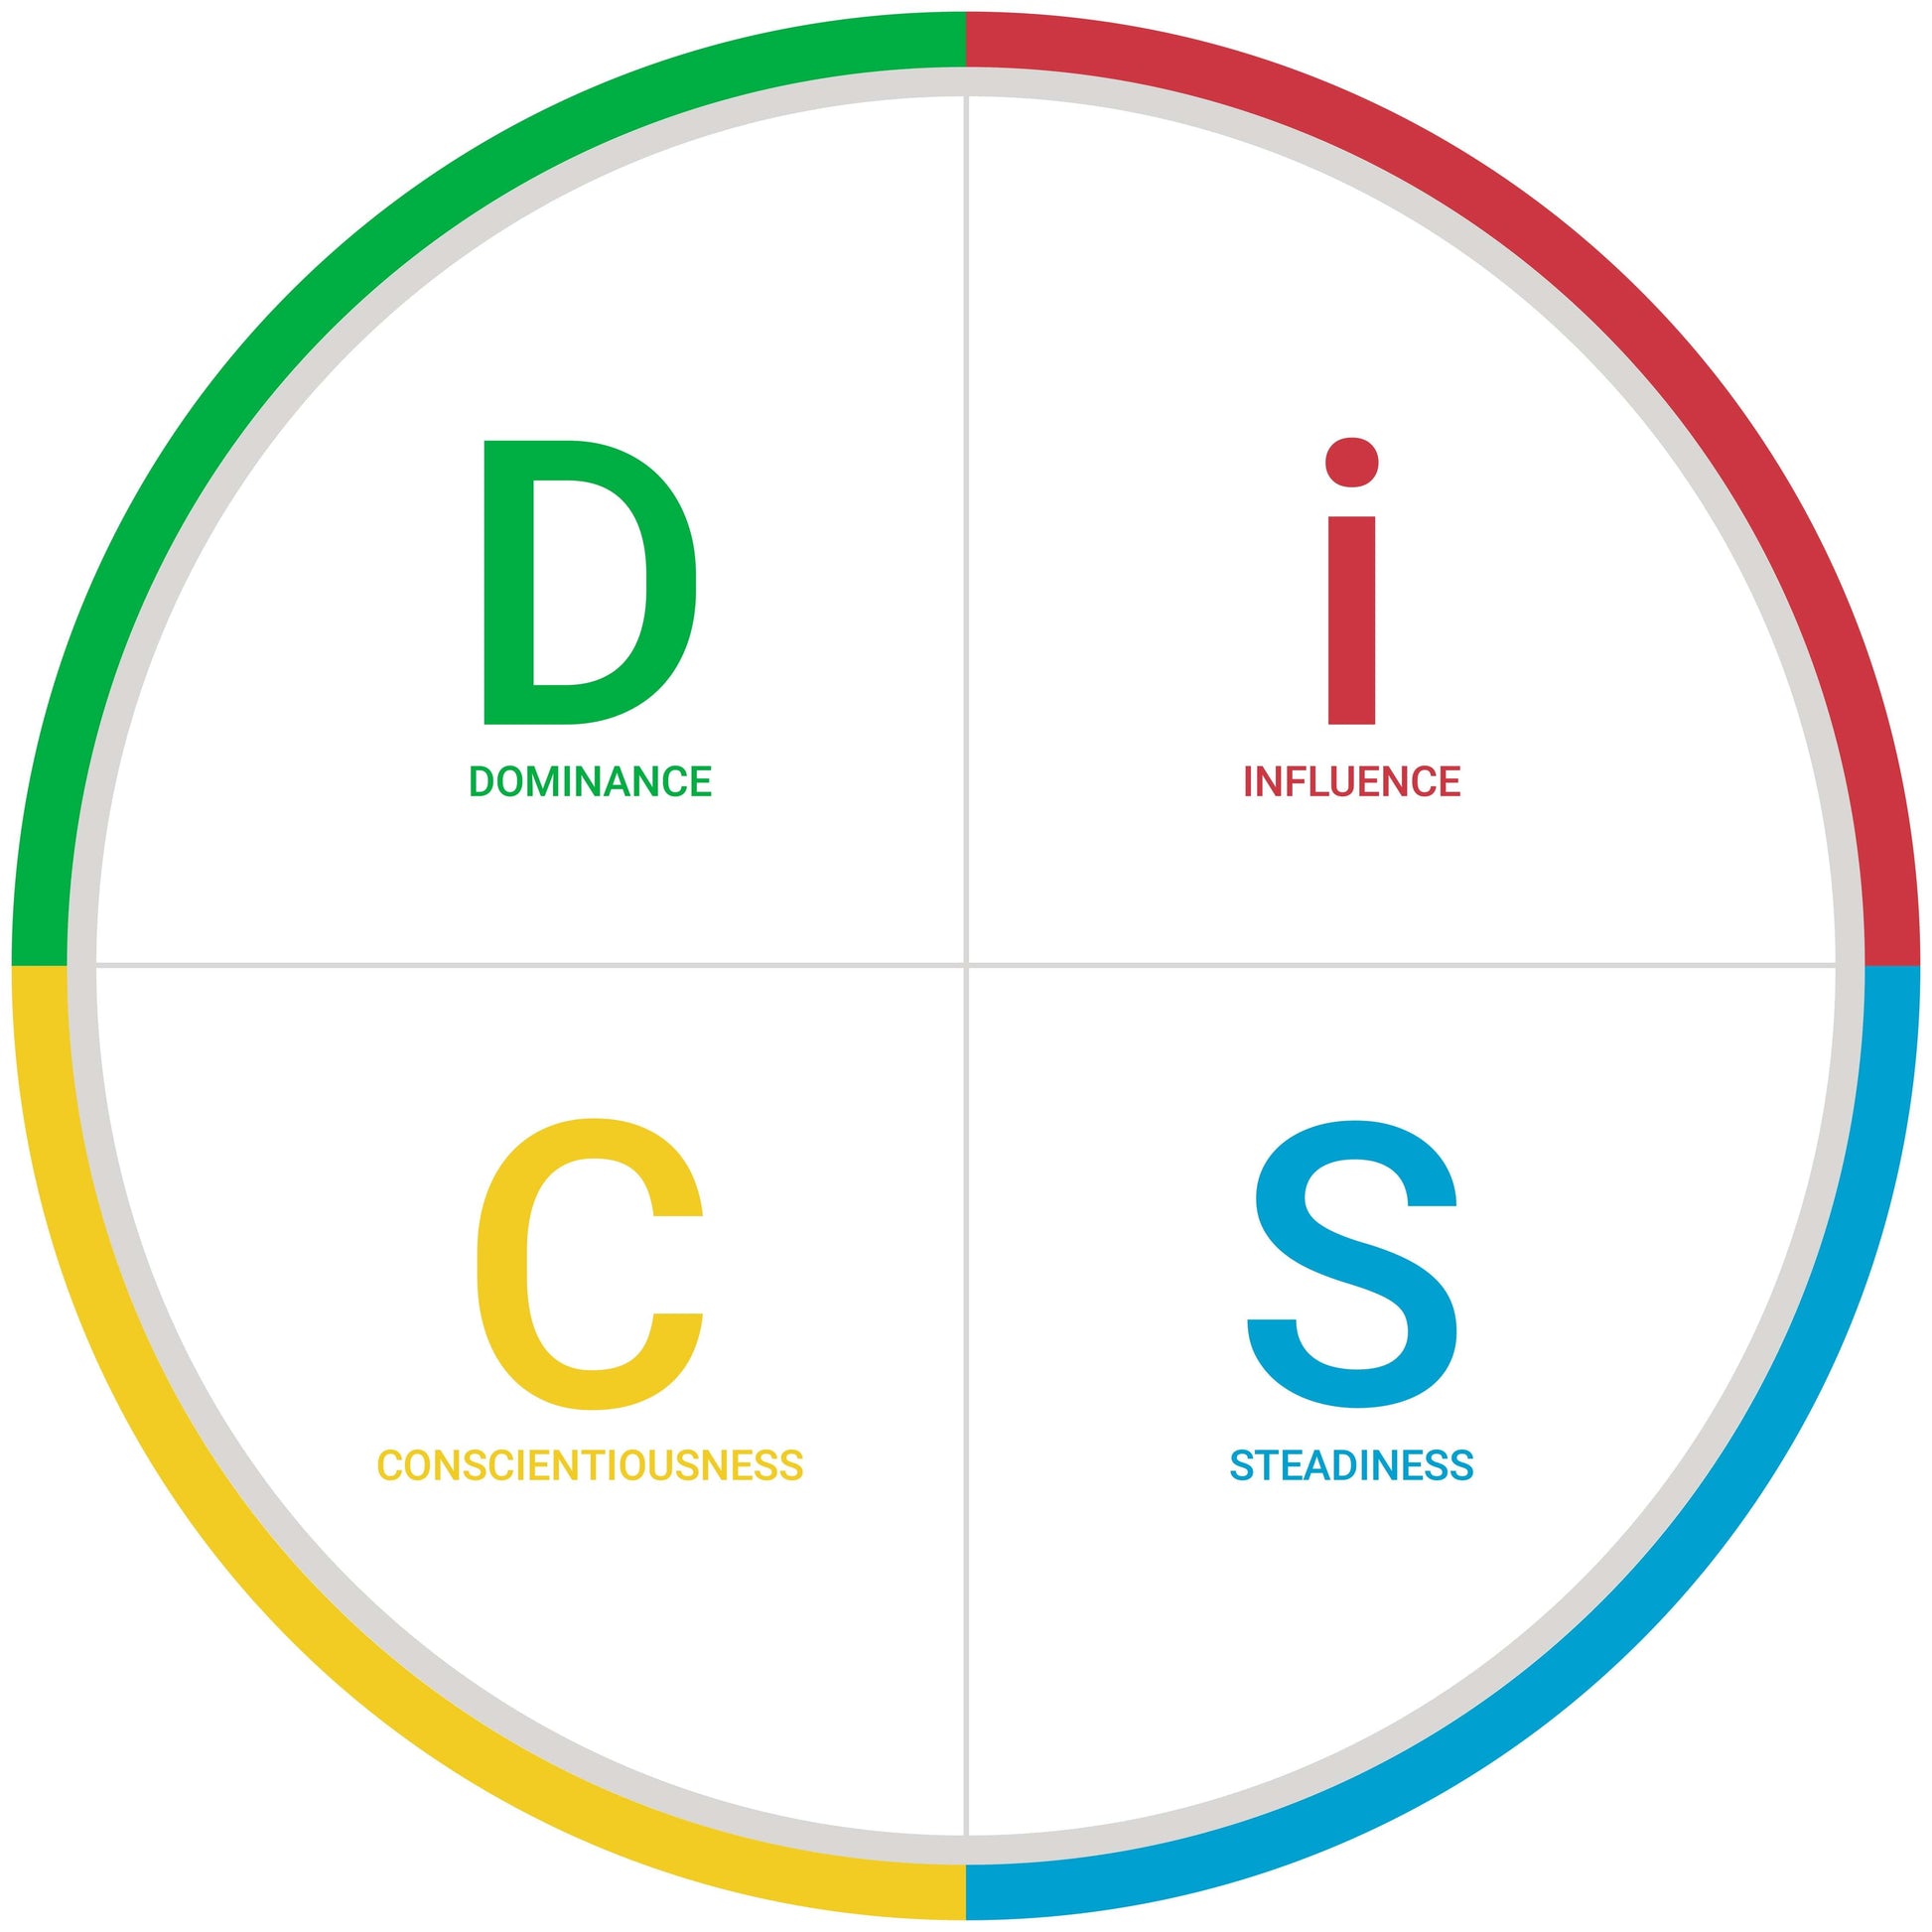 DiSC stands for Dominance - influence - consciousness - steadiness